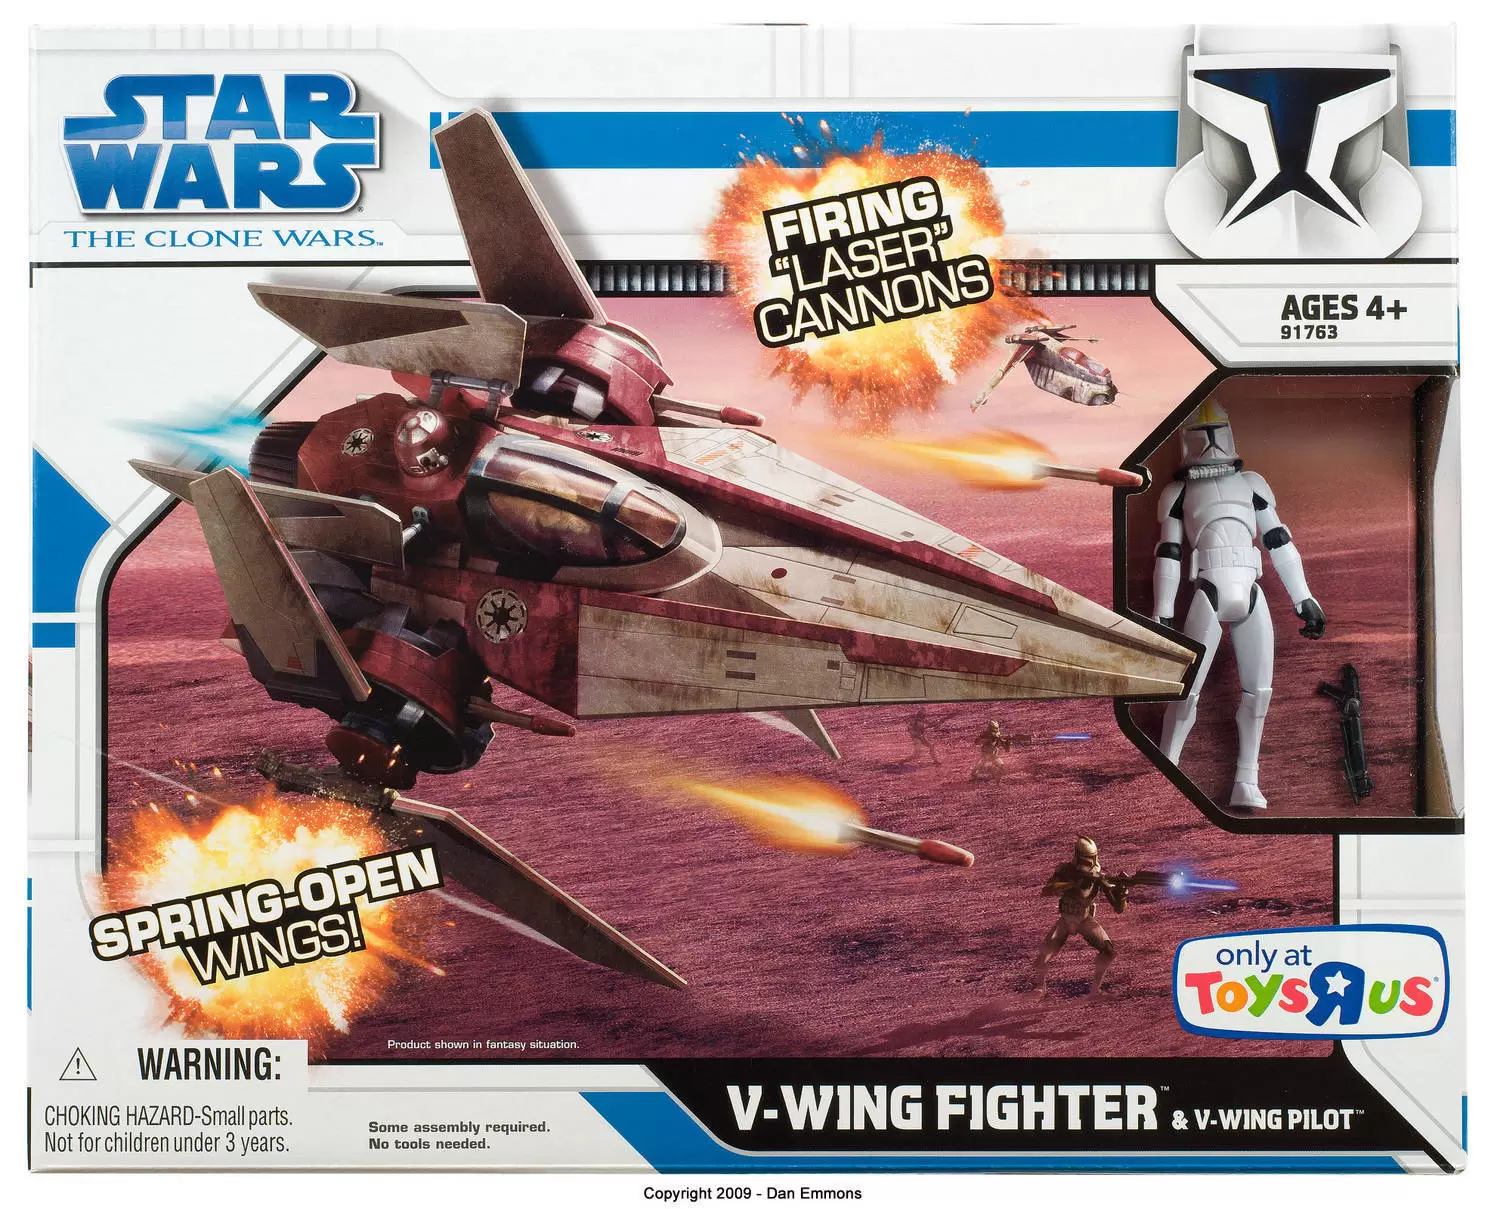 The Clone Wars (TCW 2008) - V-Wing Fighter & V-Wing Pilot